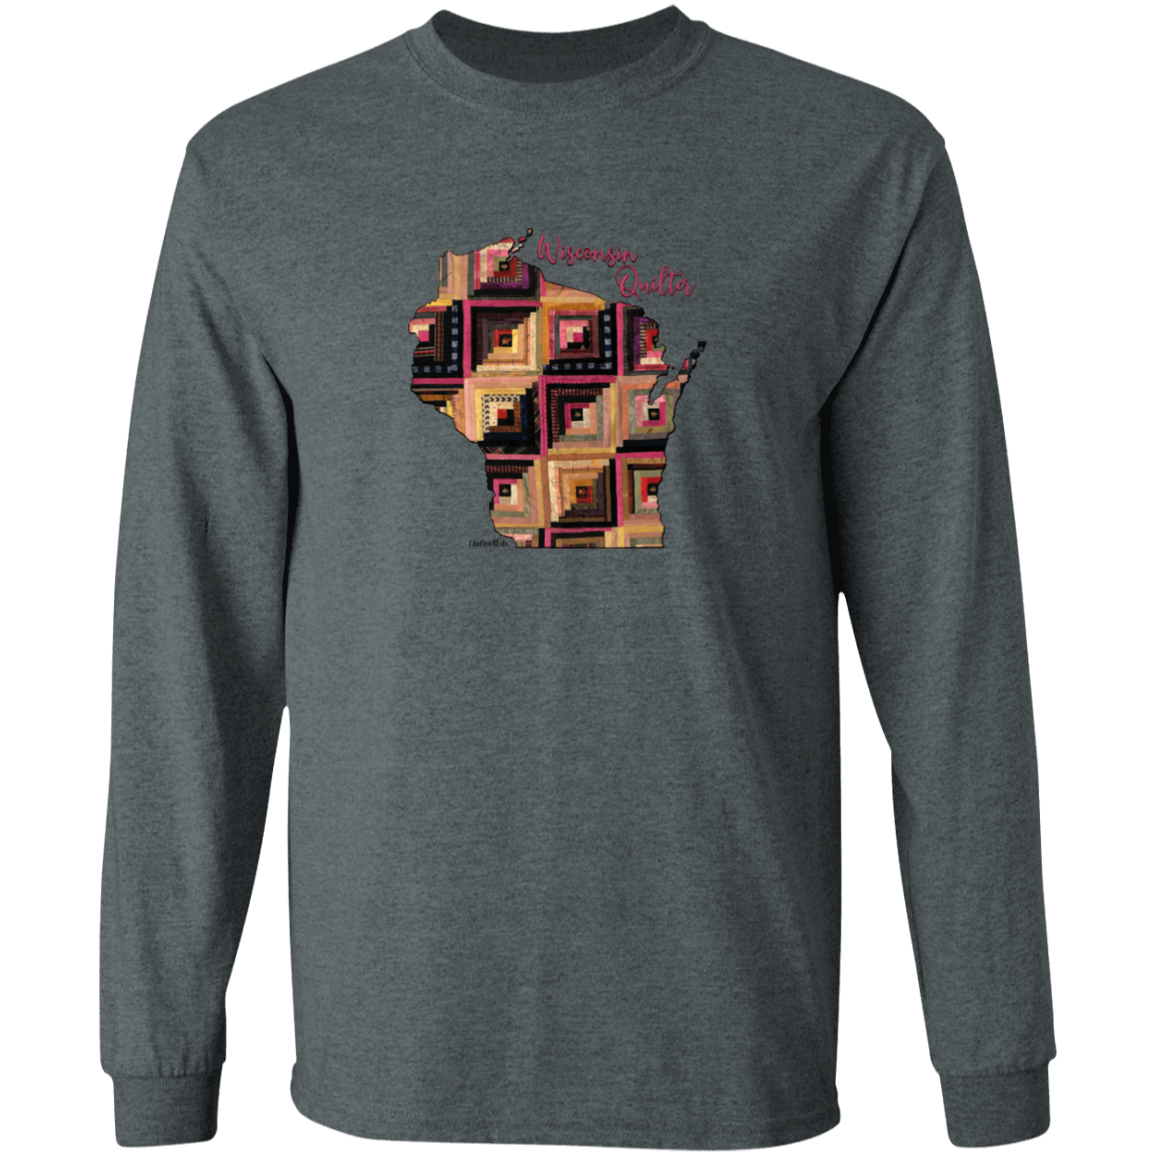 Wisconsin Quilter Long Sleeve T-Shirt, Gift for Quilting Friends and Family